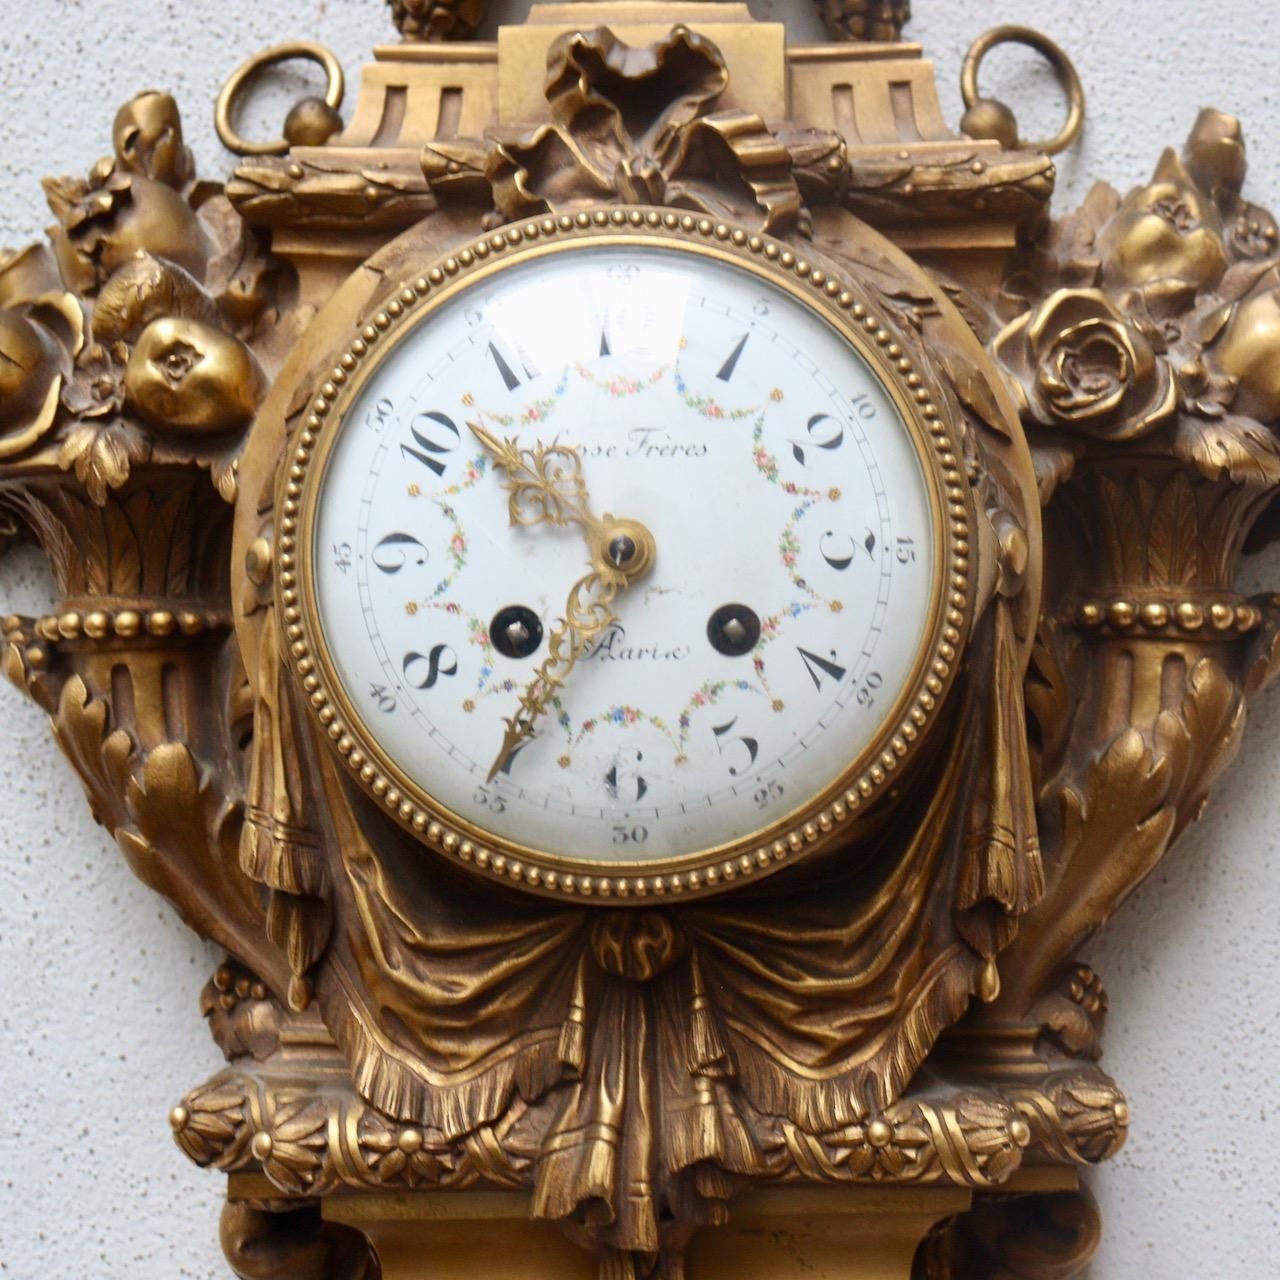 Mid-19th Century A French Napoléon III Ormolu Cartel Clock by Susse Frères Paris circa 1870 For Sale